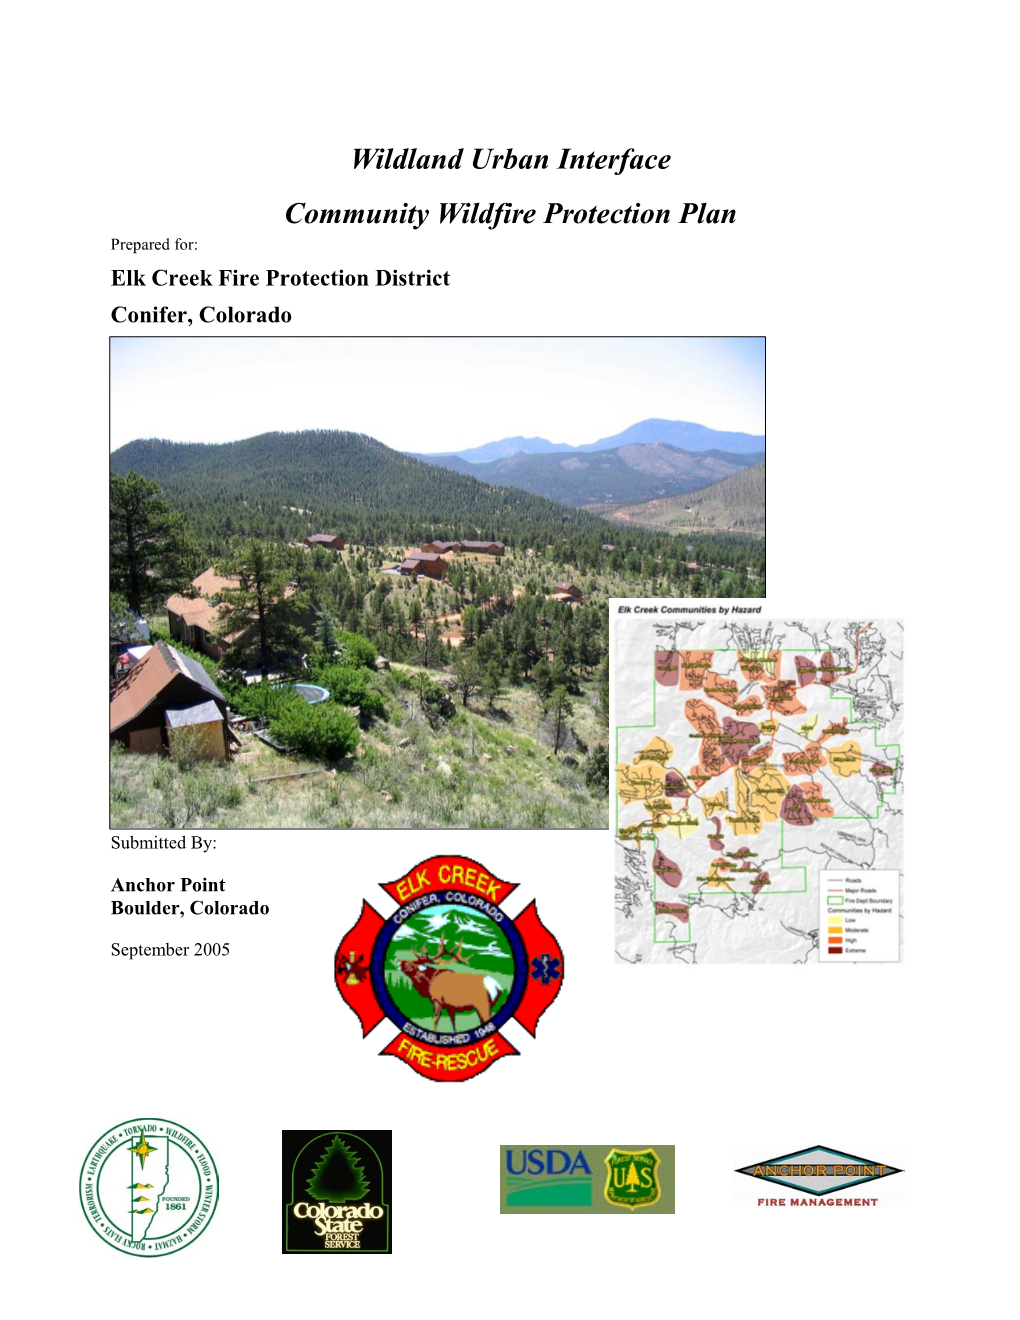 S-215 Fire Operations in the Wildland/Urban Interface